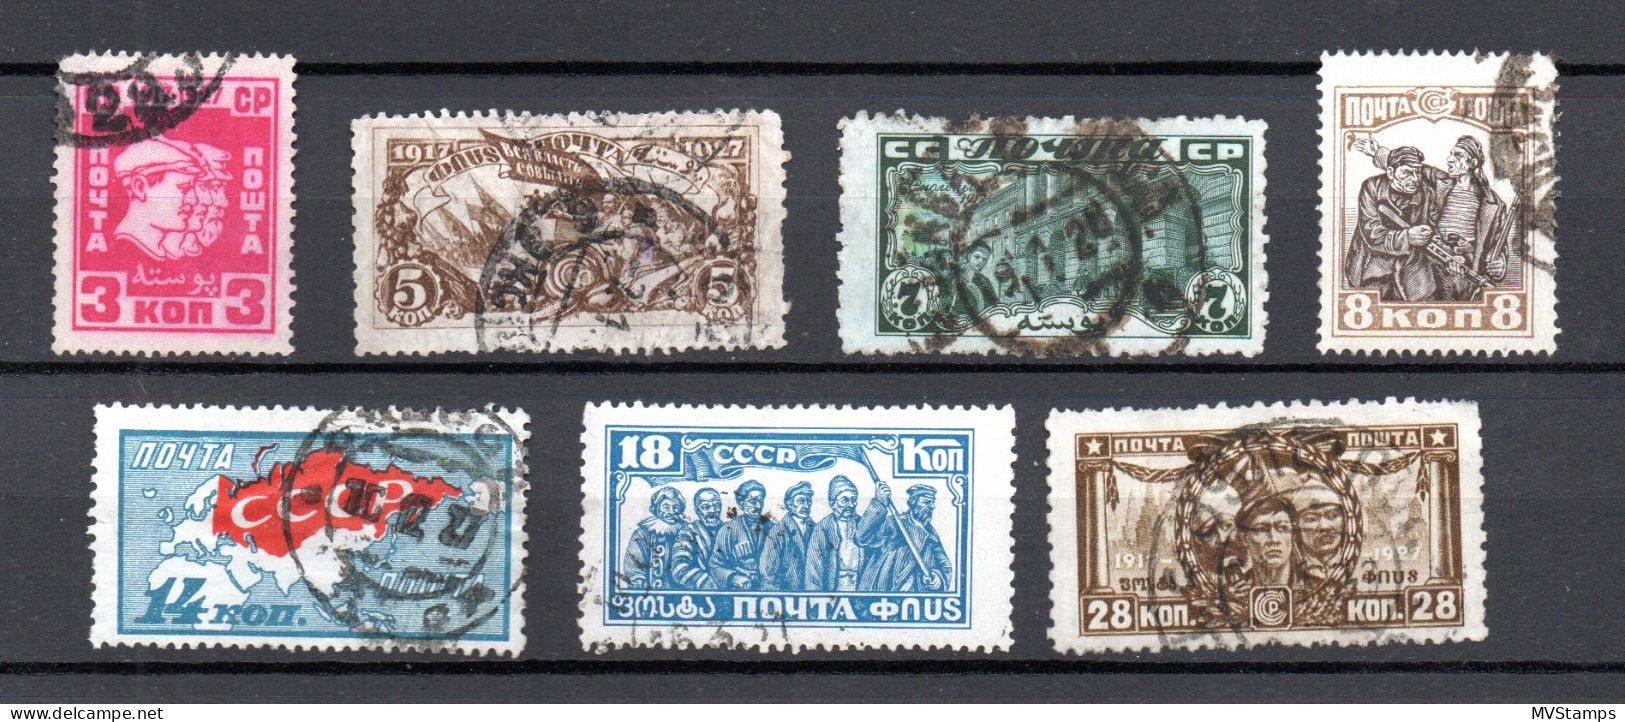 Russia 1941 Old 20 Kon, W.Surikow Stamp (Michel 814) Nice MLH - Used Stamps